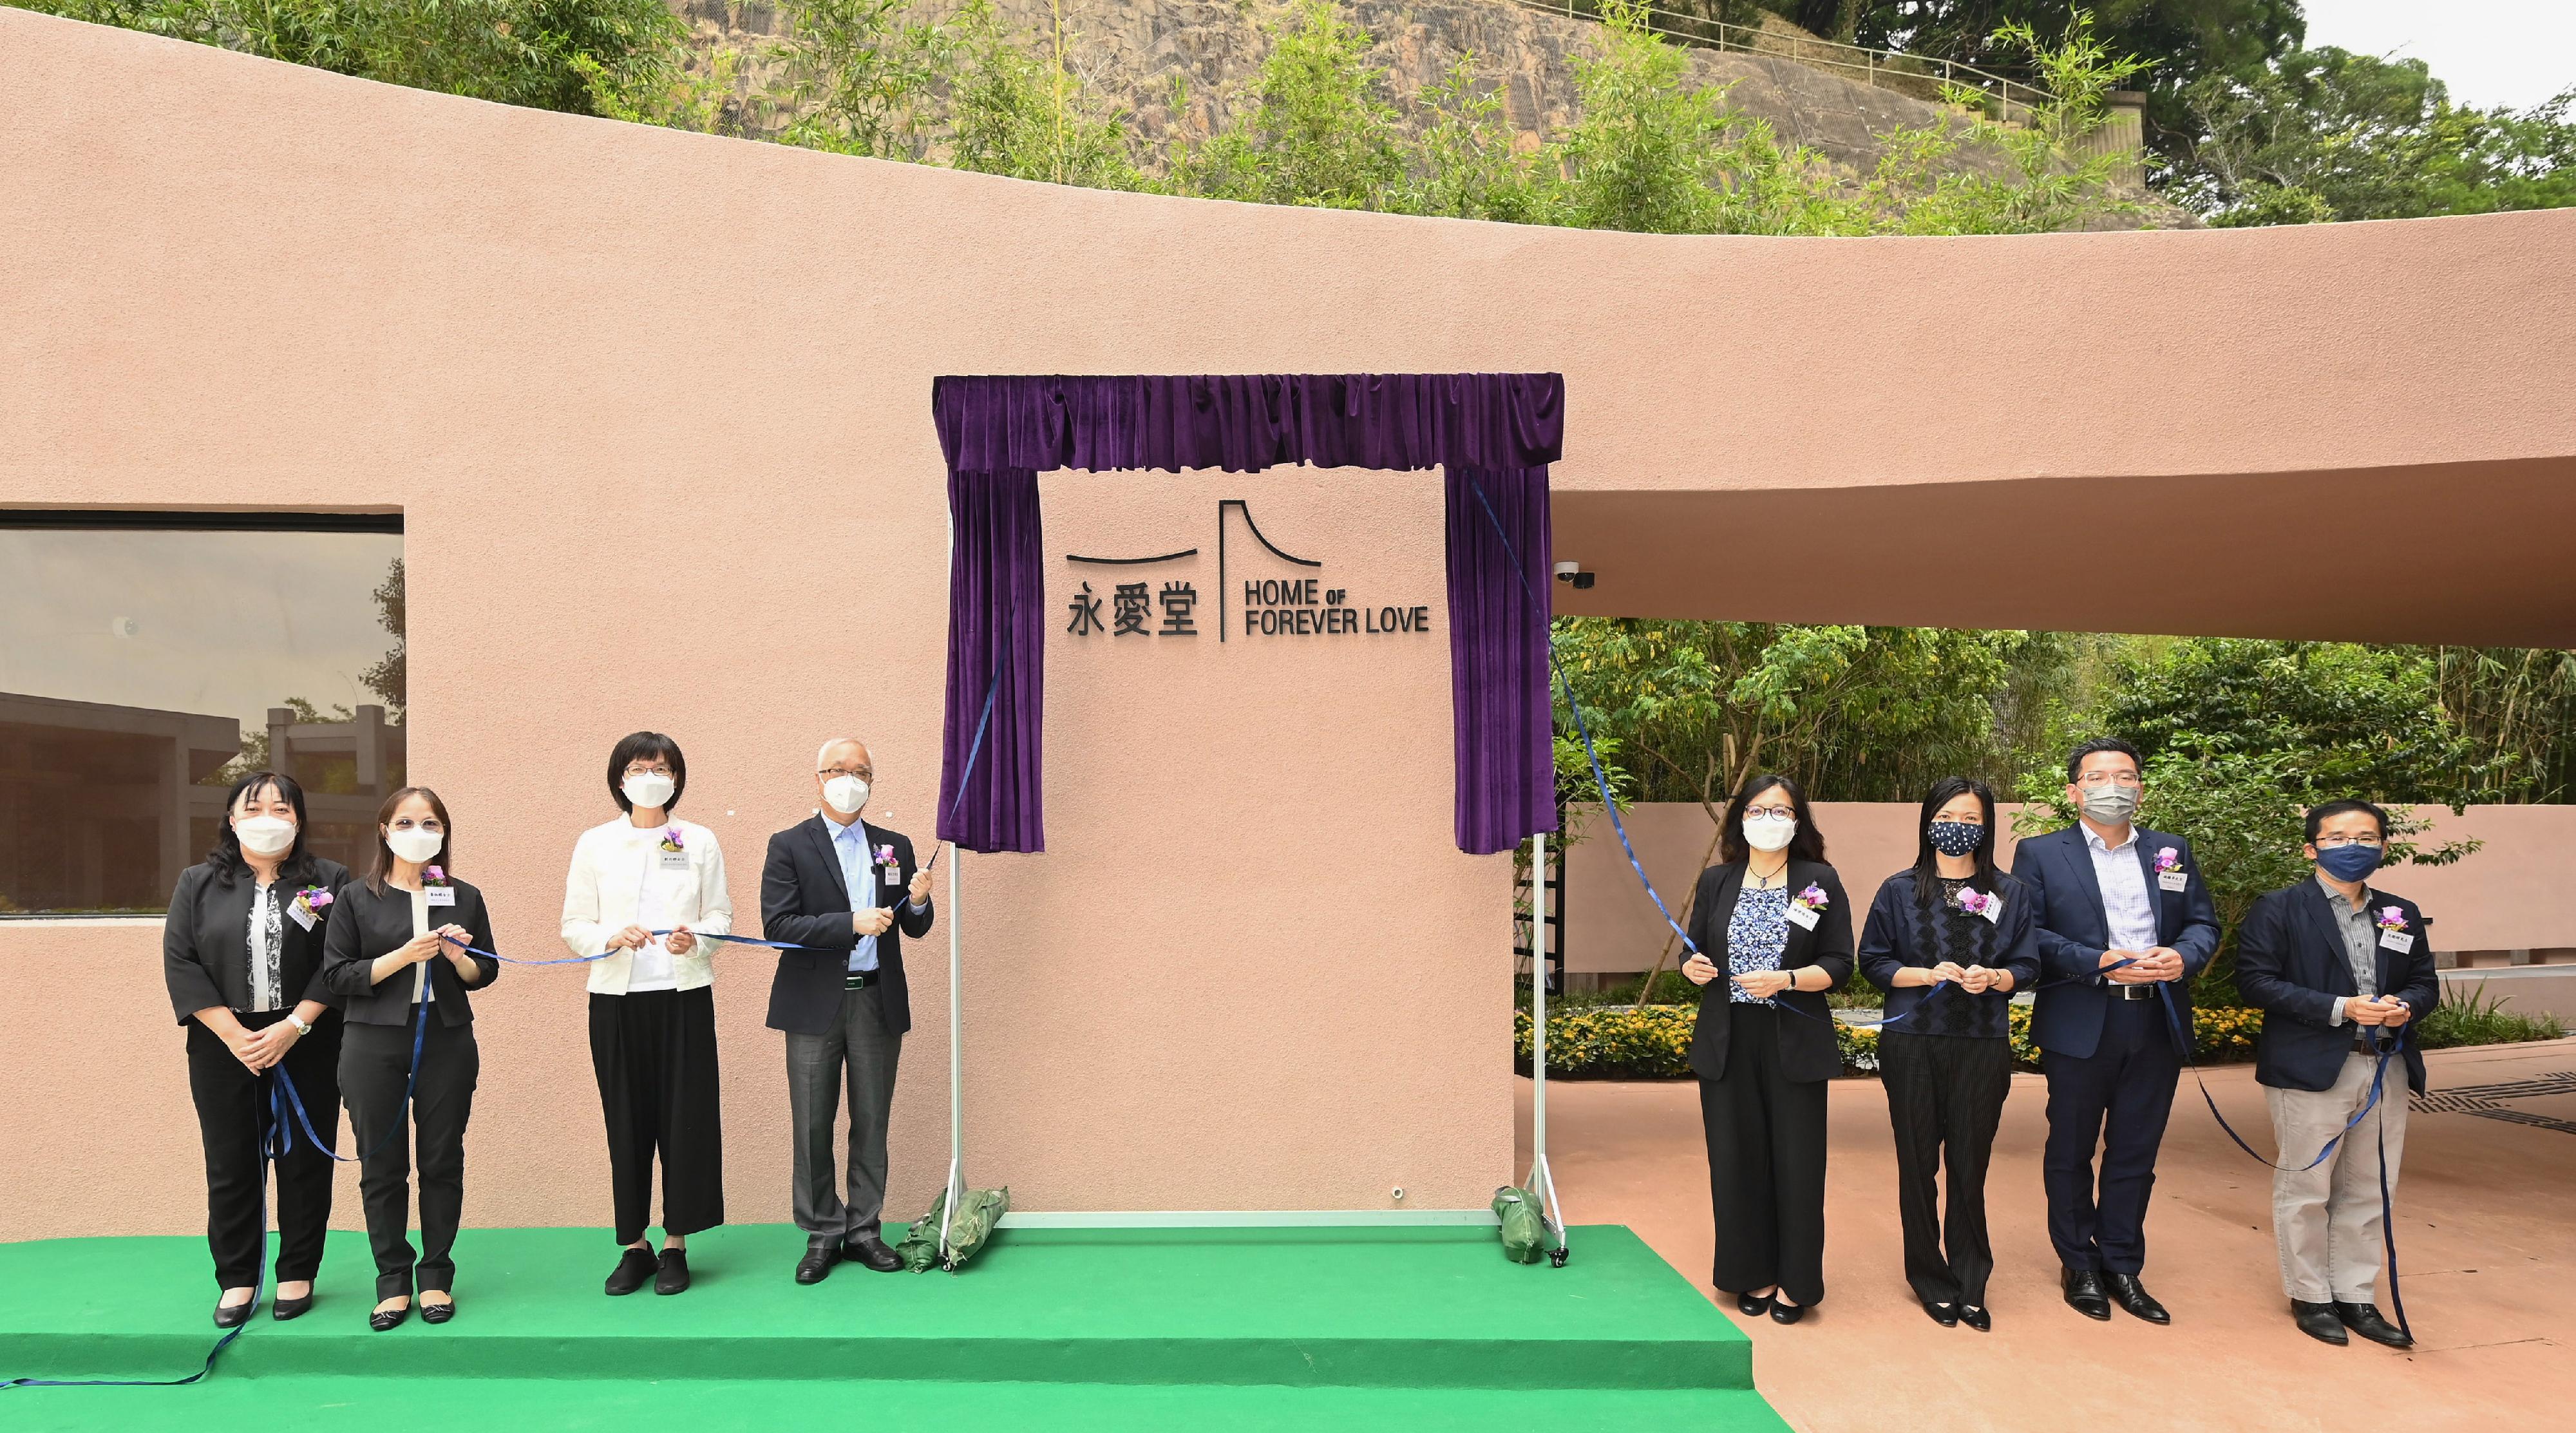 The Secretary for Environment and Ecology, Mr Tse Chin-wan (fourth left), today (September 23) officiated at the opening ceremony for the Home of Forever Love, the pioneer cremation facility dedicated for abortuses of less than 24 weeks' gestation managed by the Food and Environmental Hygiene Department. Other officiating guests included the Permanent Secretary for Environment and Ecology (Food), Miss Vivian Lau (third left); the Under Secretary for Environment and Ecology, Miss Diane Wong (second left); and the Director of Food and Environmental Hygiene, Ms Irene Young (fourth right).

